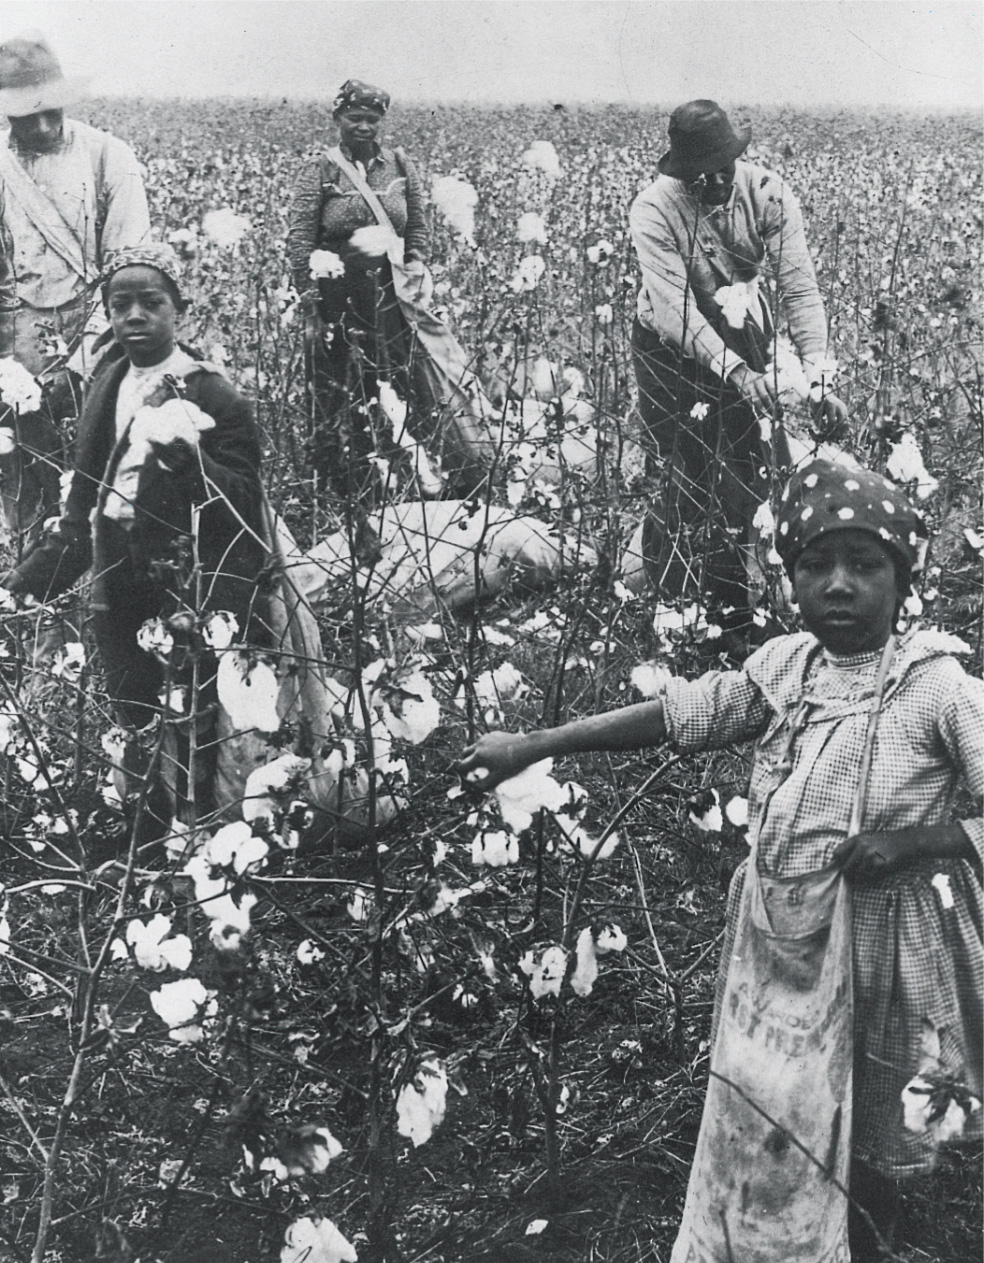 A photo shows African-Americans picking cotton.